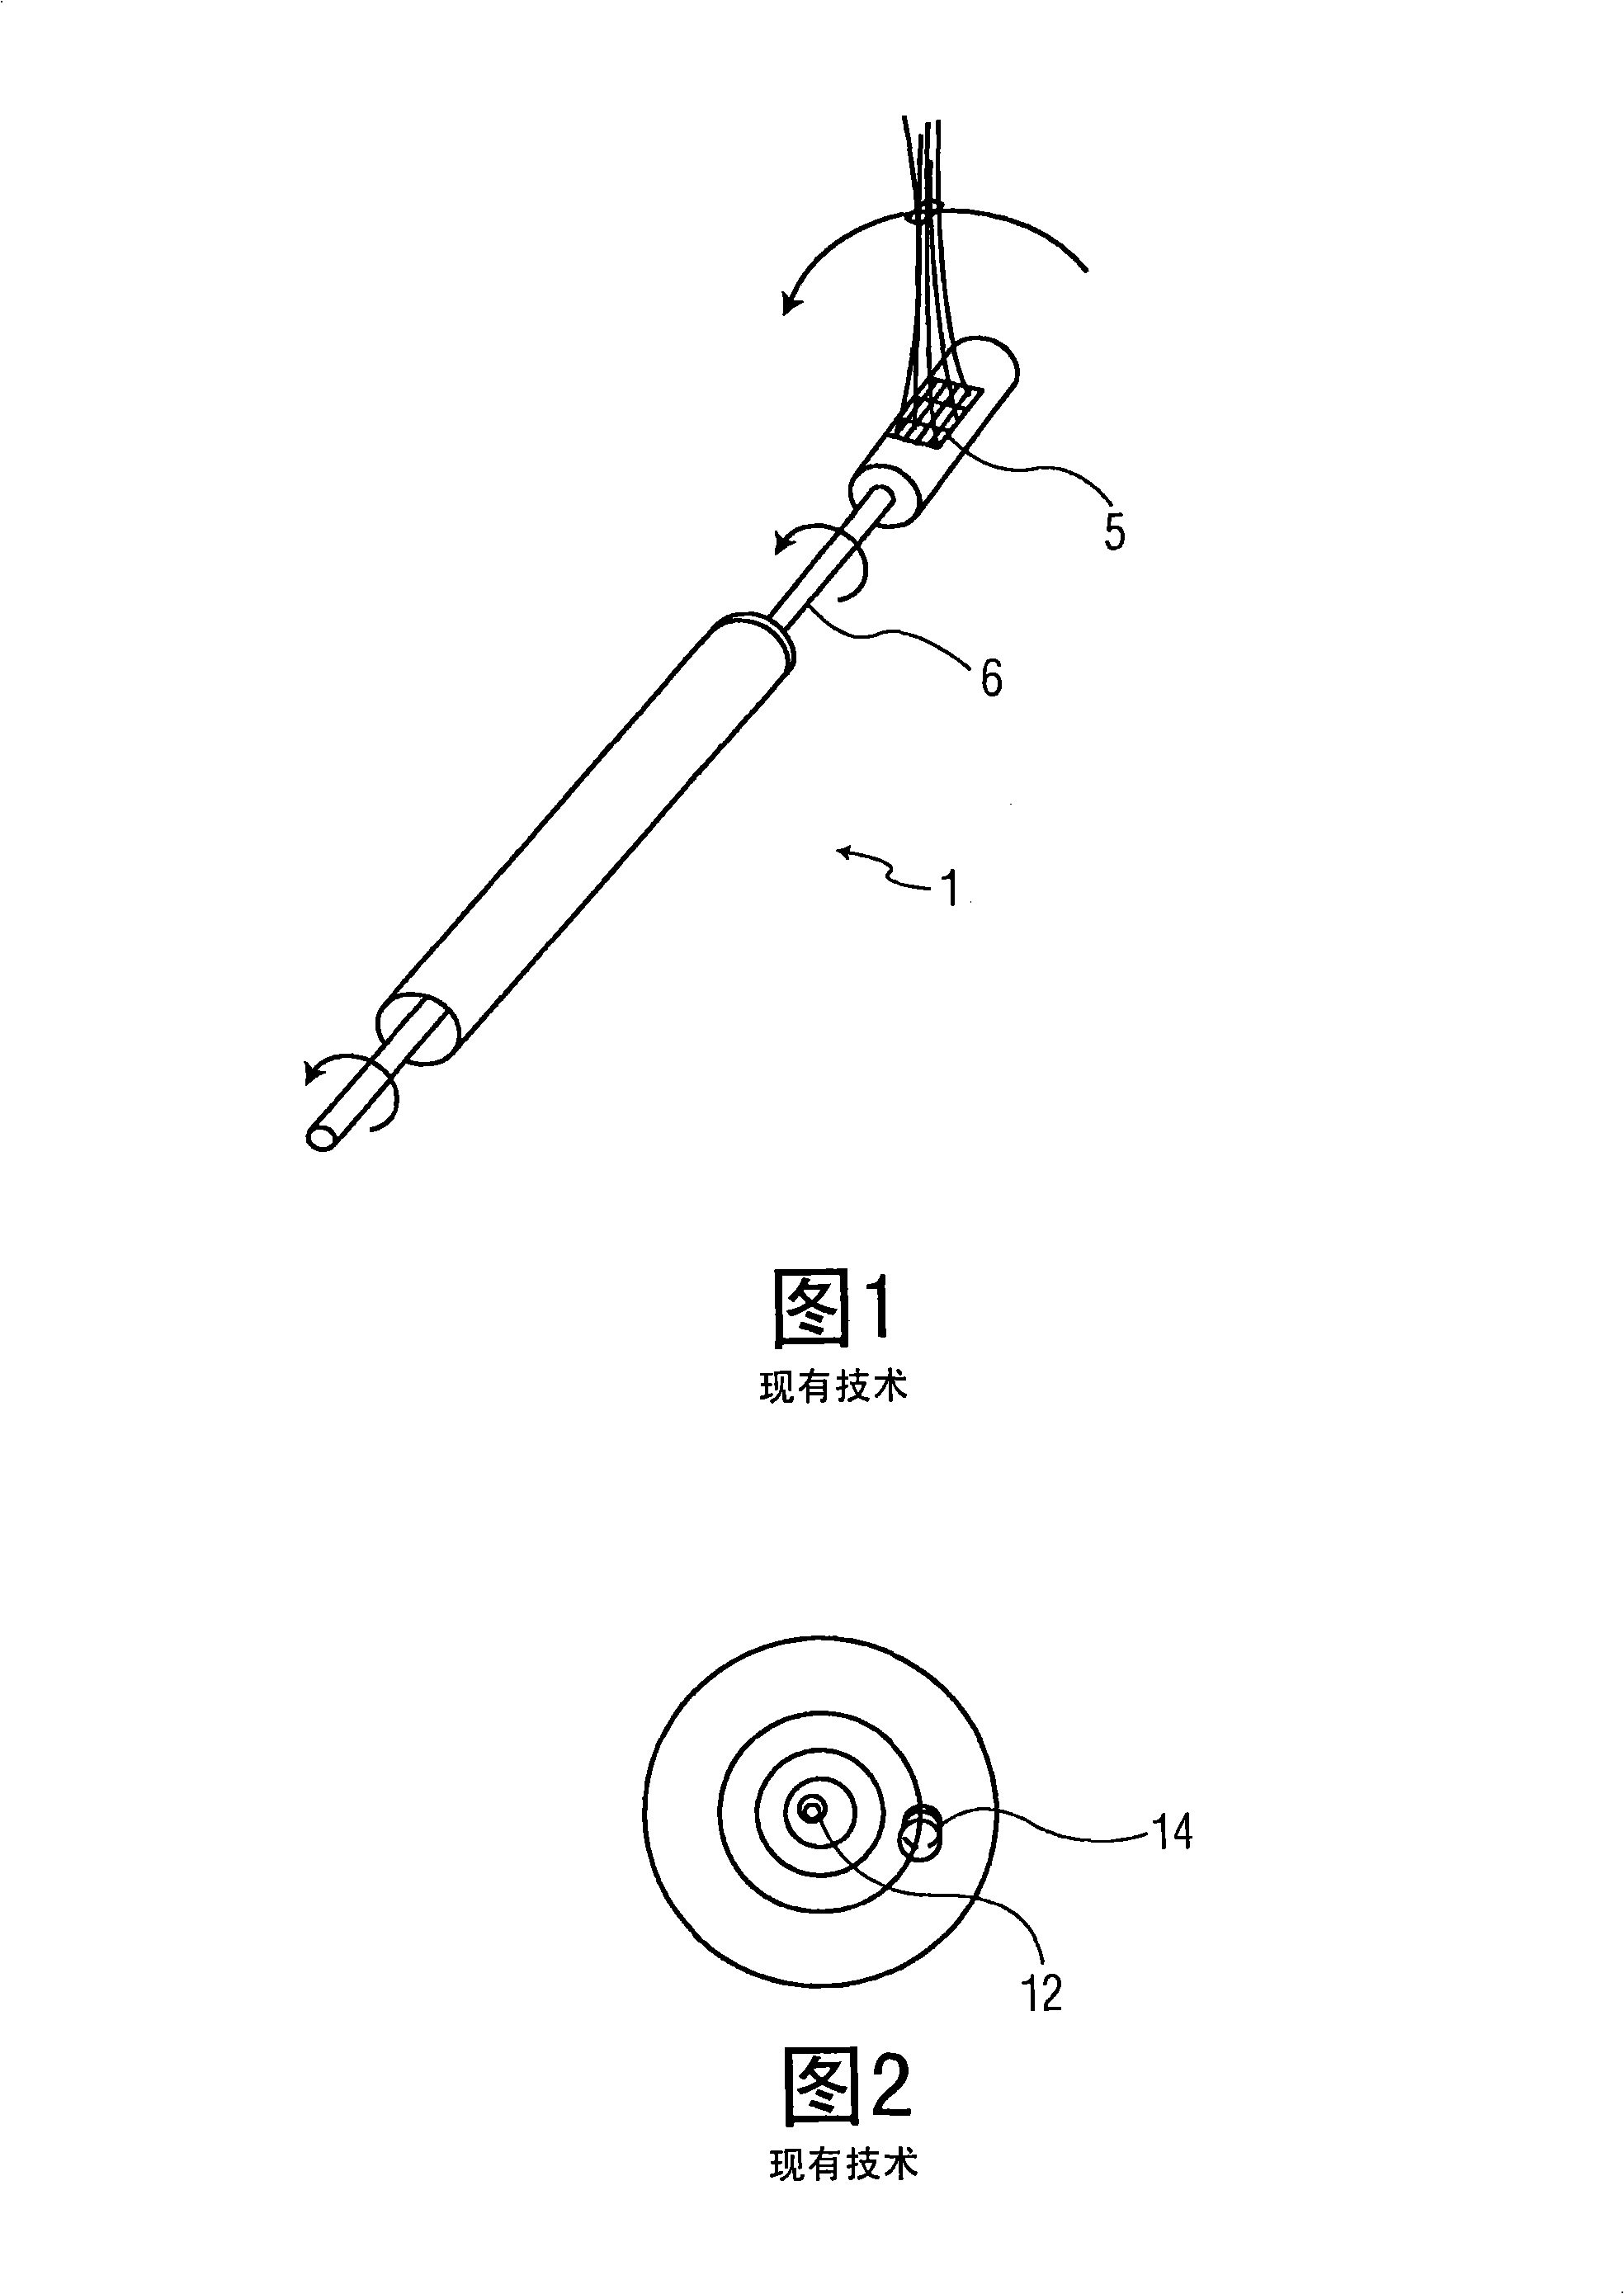 2d ultrasound transducer for radial application and method